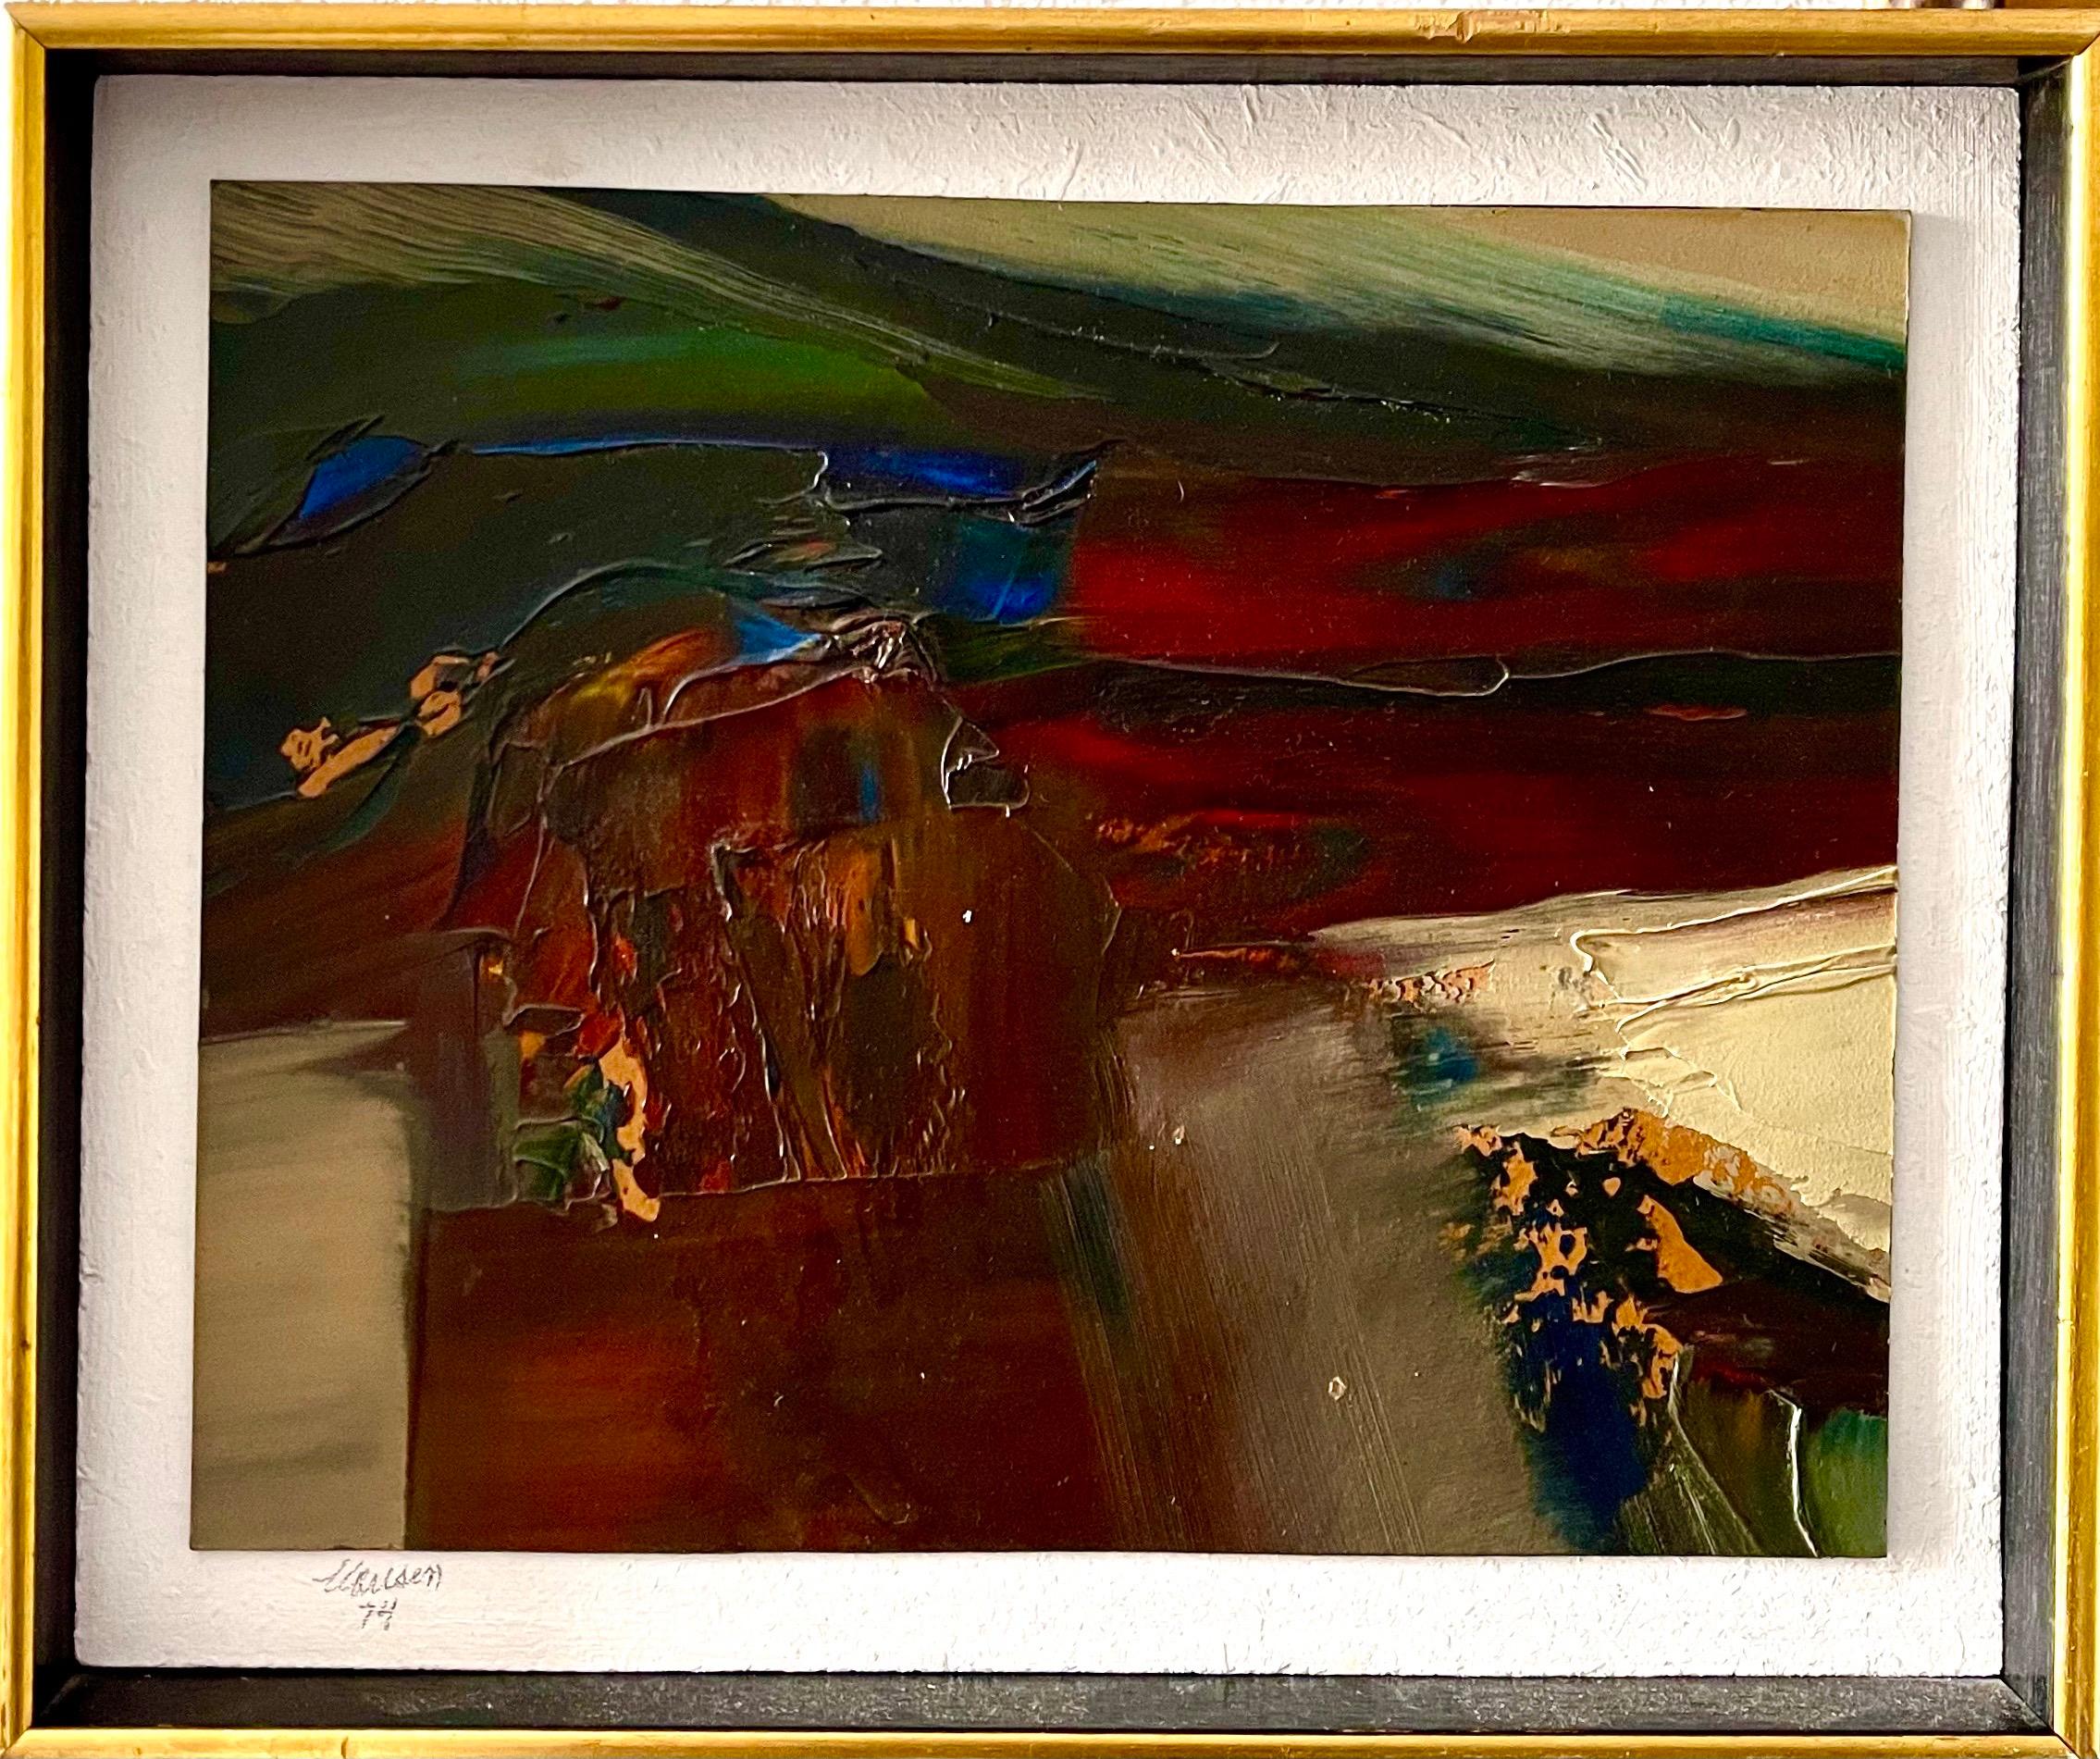 1974 California Bay Area Abstract Expressionist Bold Oil Painting Don Clausen